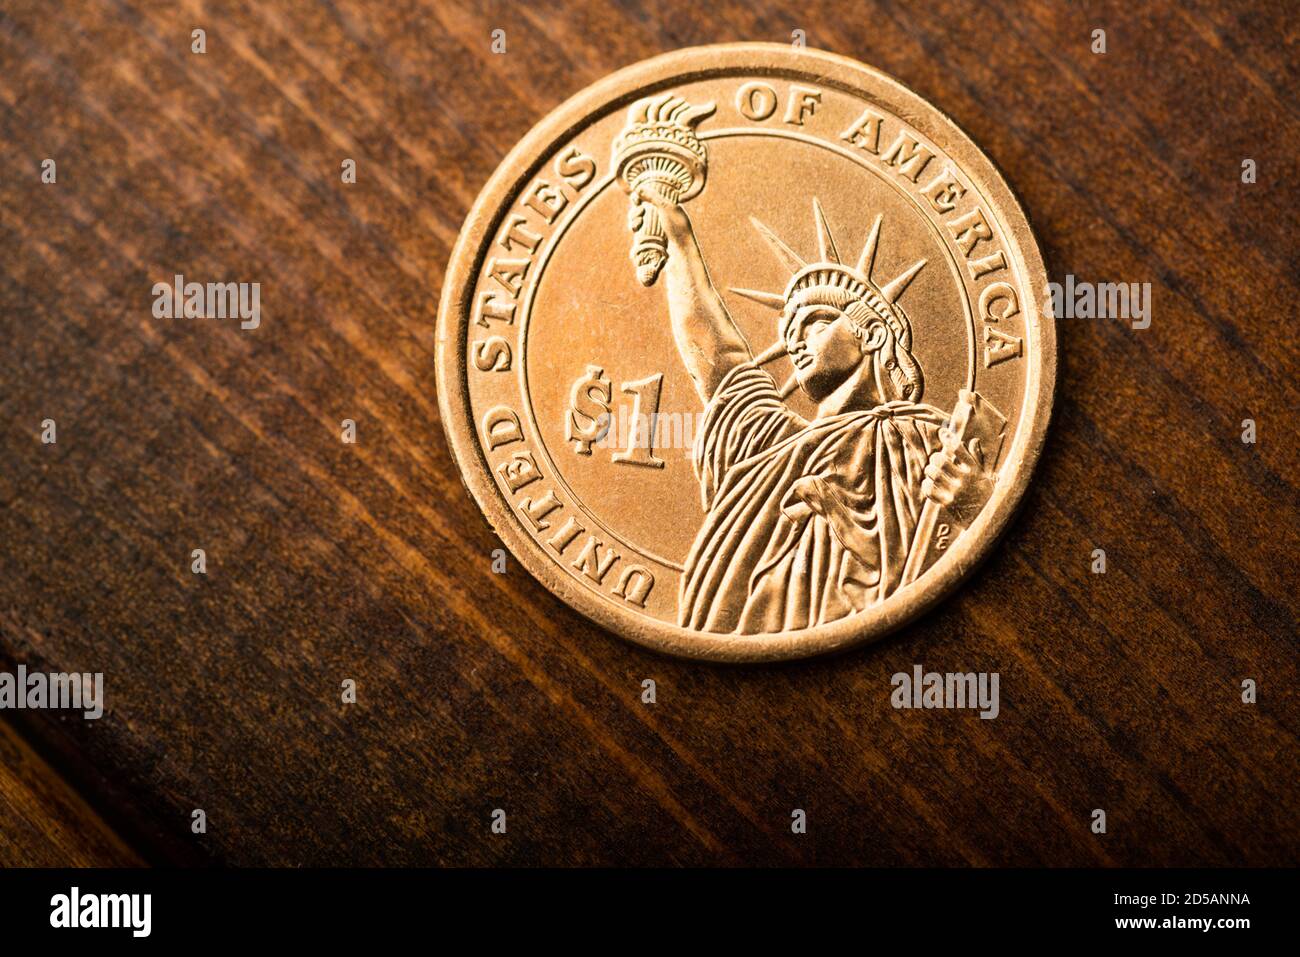 One dollar coin on desk Stock Photo